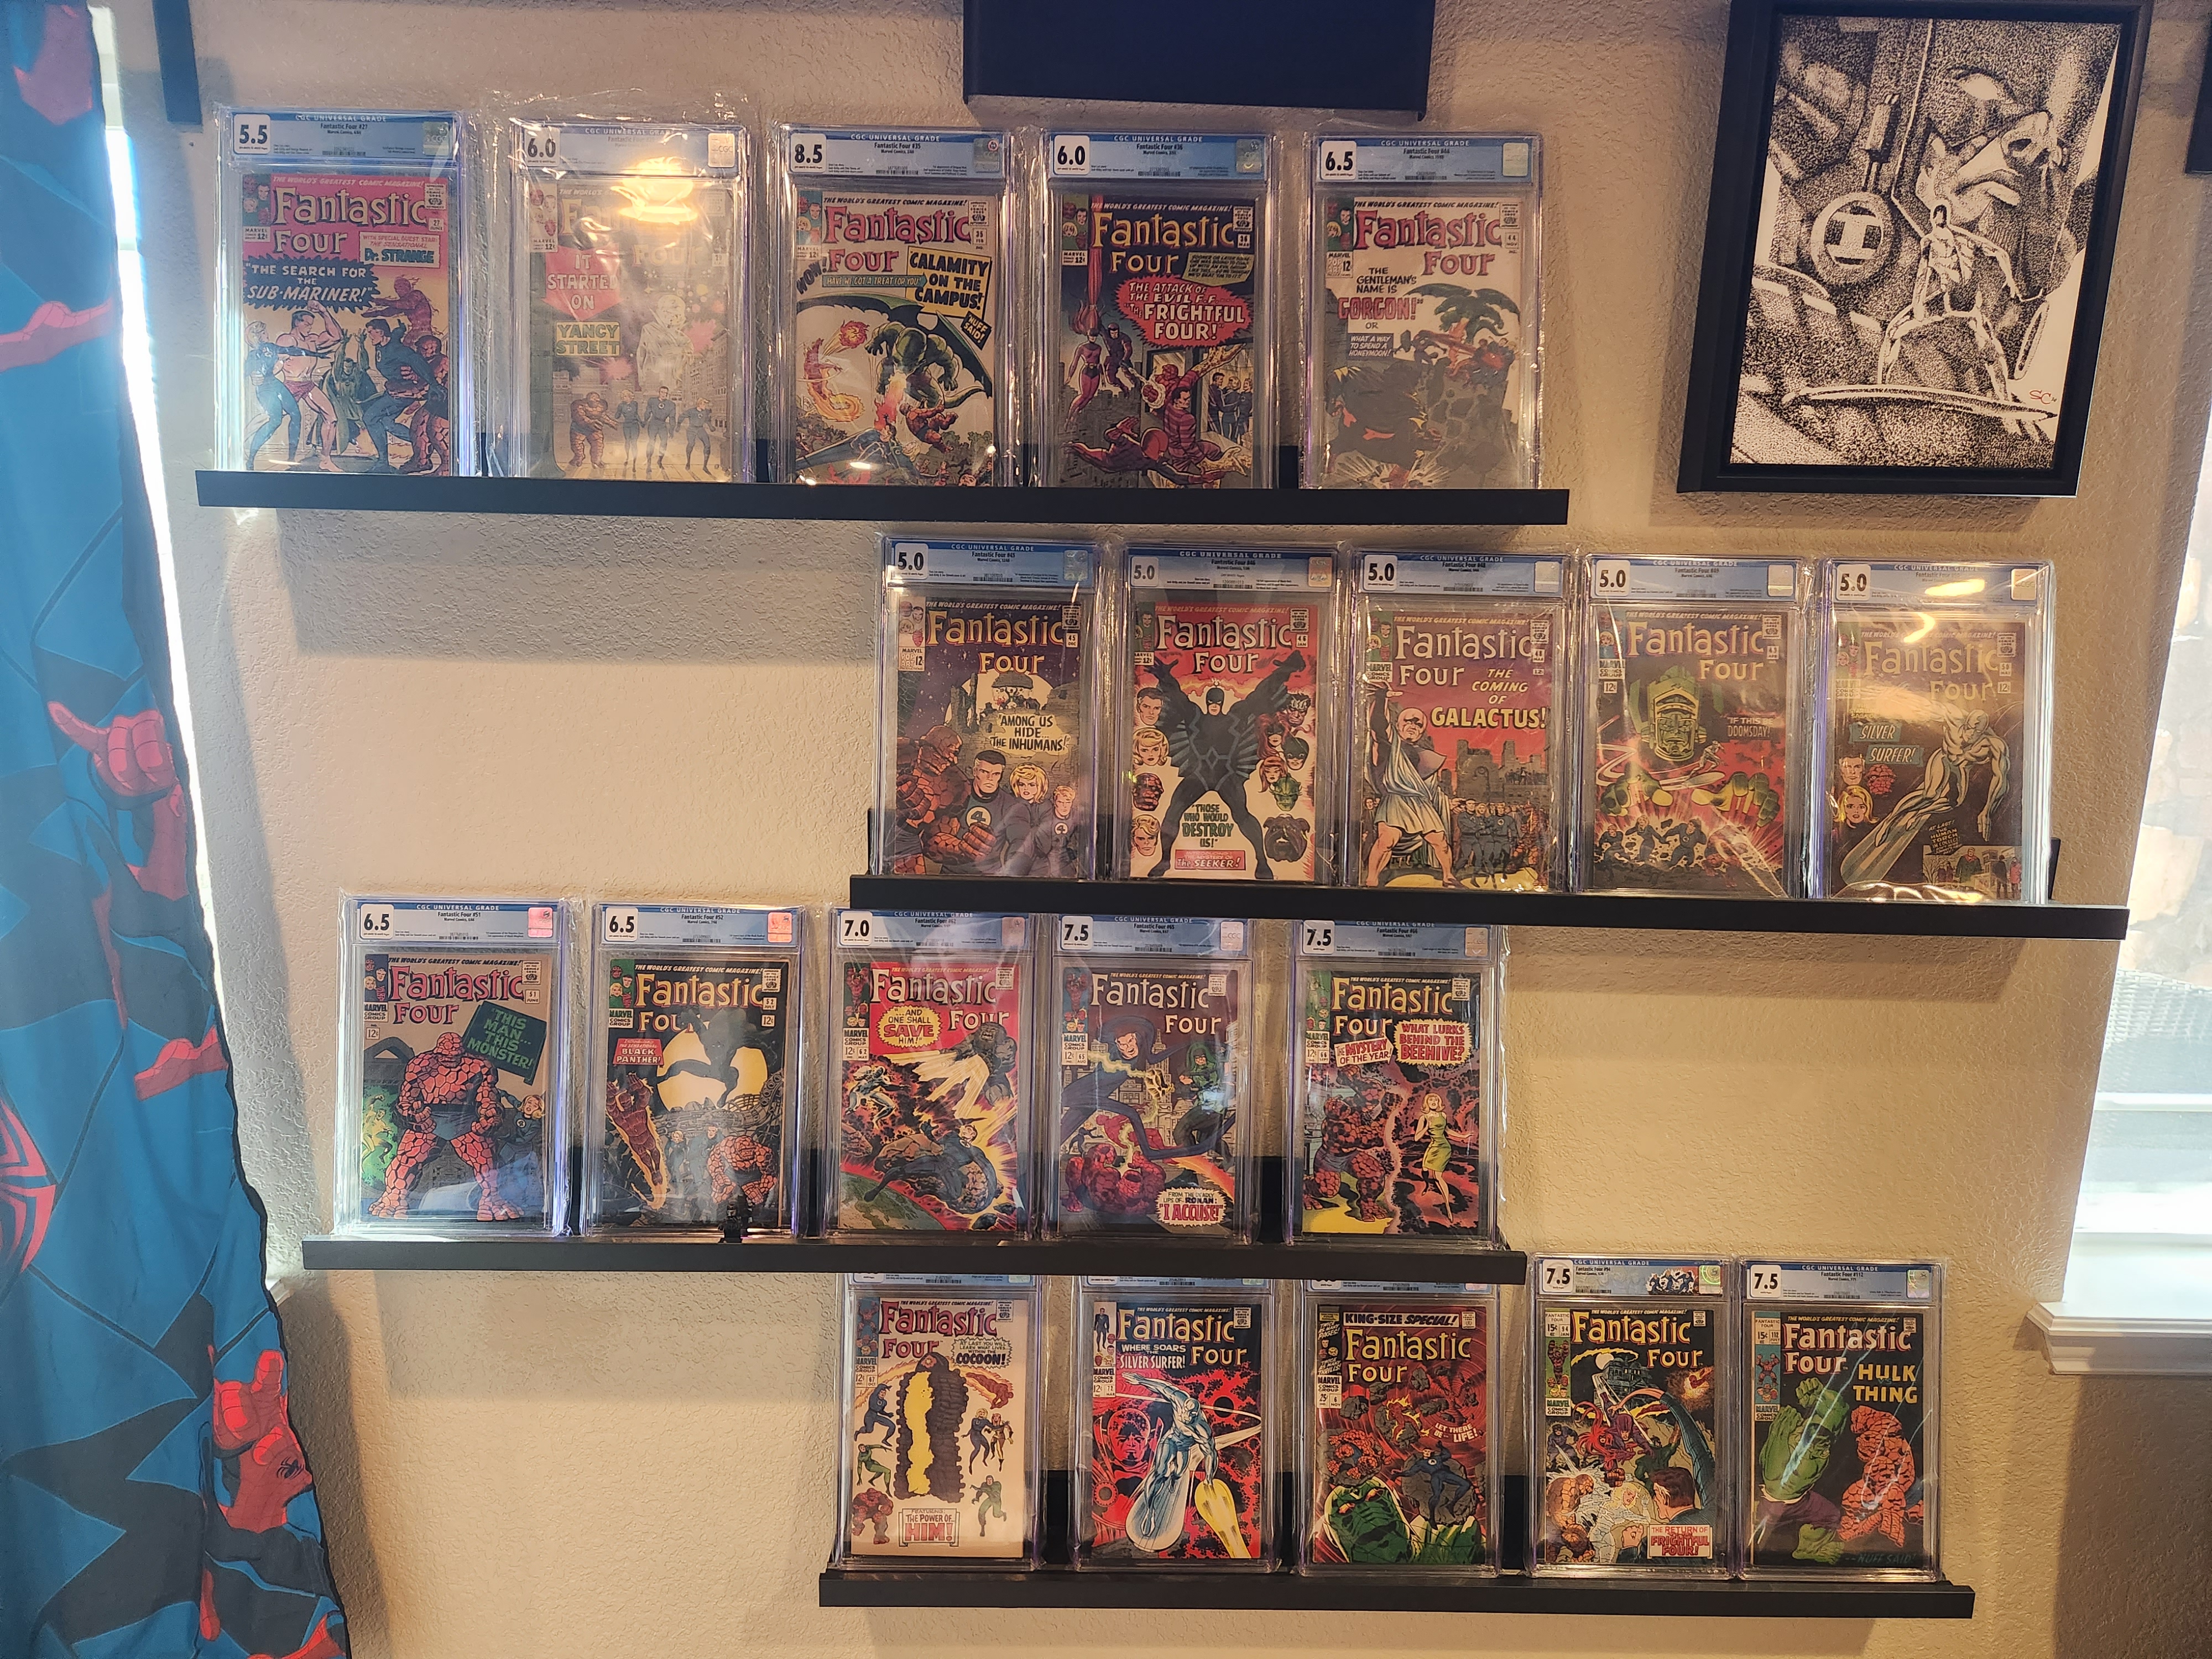 The Amazing Spider-Man collection